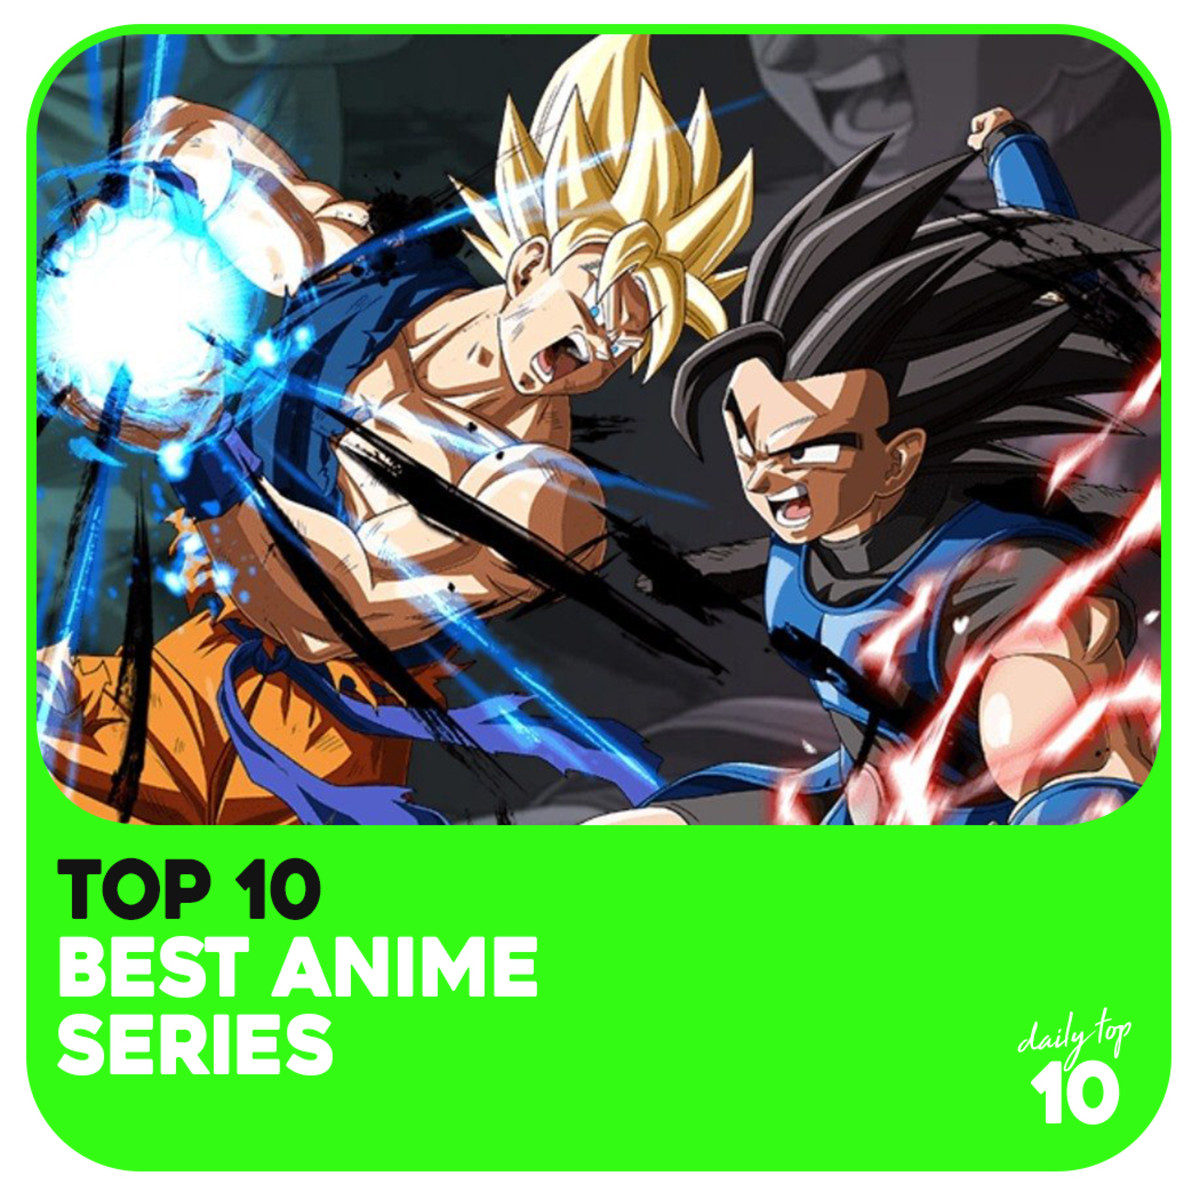 Top 10 Best Anime Series (Plus Honorable Mentions)